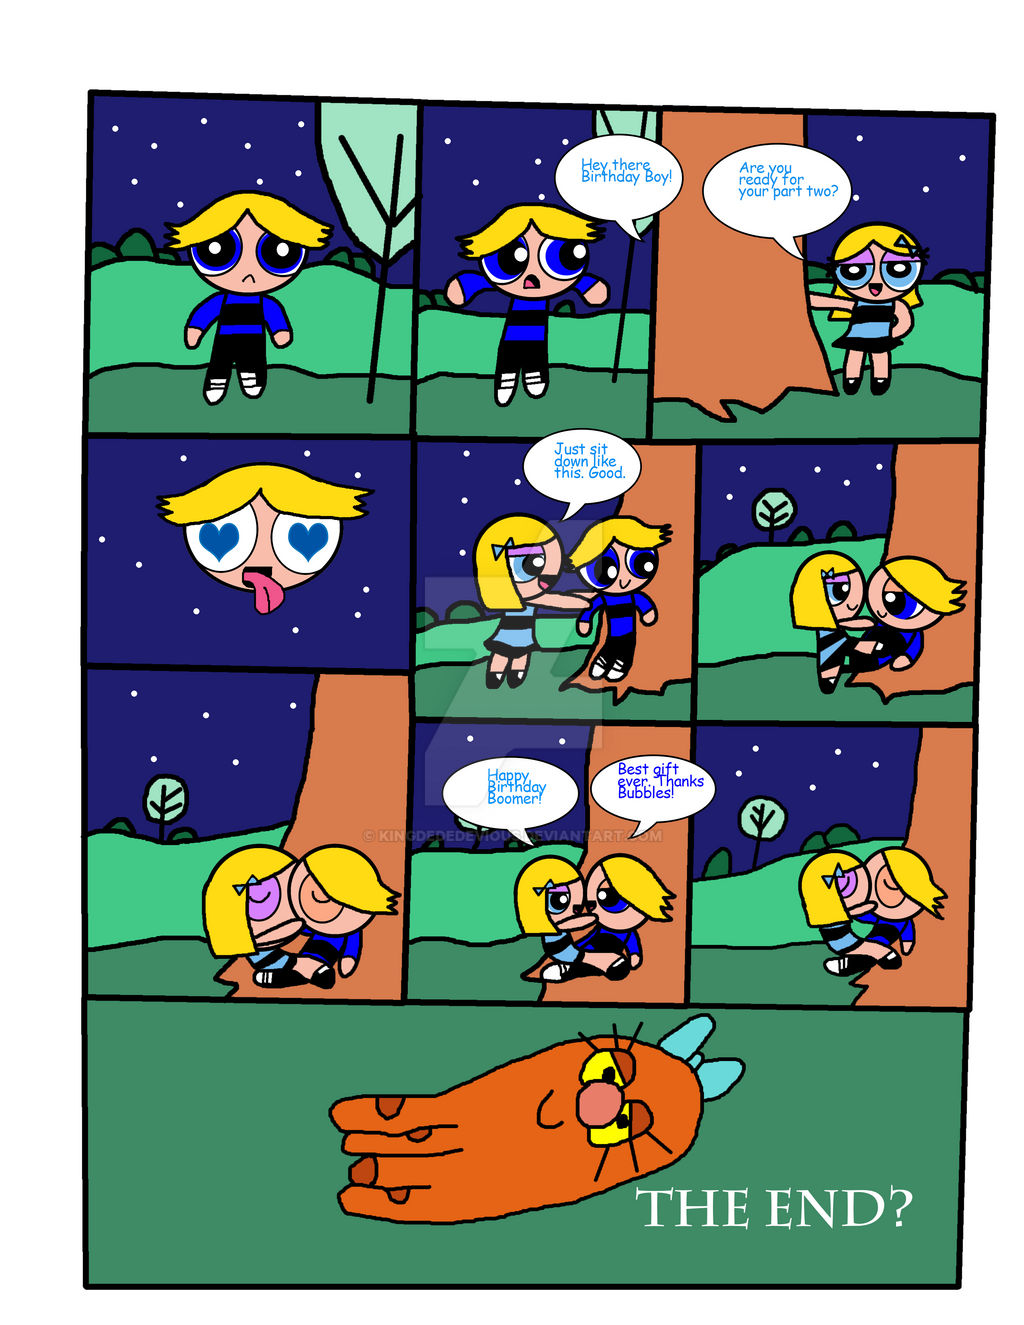 Introducing Boxy Boo Comic by supersader9 on DeviantArt